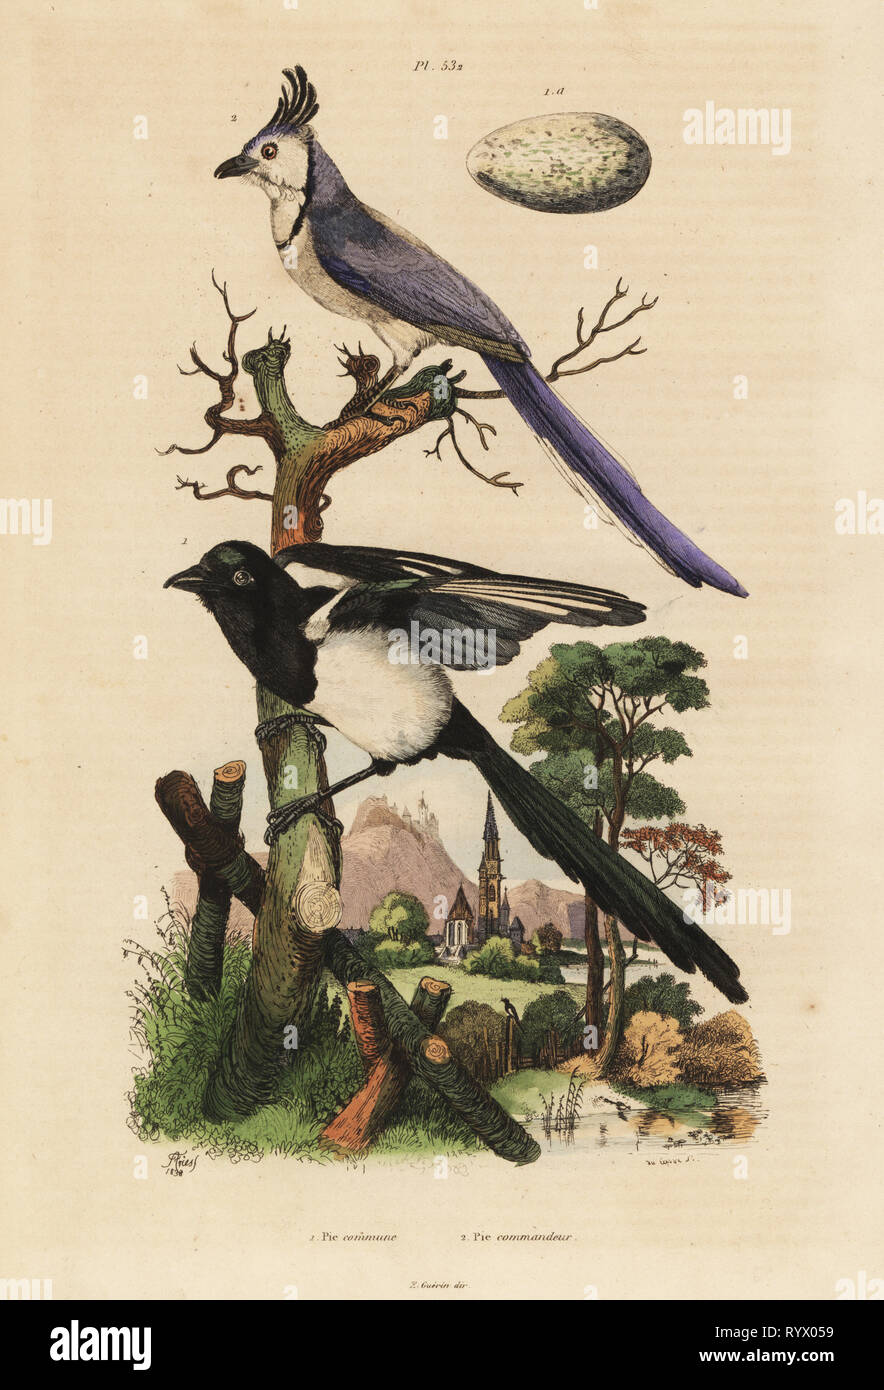 Common magpie, Pica pica, and white-throated magpie-jay, Calocitta formosa, with egg. Pie commune et pie commandeur. Handcoloured steel engraving by du Casse after an illustration by Adolph Fries from Felix-Edouard Guerin-Meneville's Dictionnaire Pittoresque d'Histoire Naturelle (Picturesque Dictionary of Natural History), Paris, 1834-39. Stock Photo